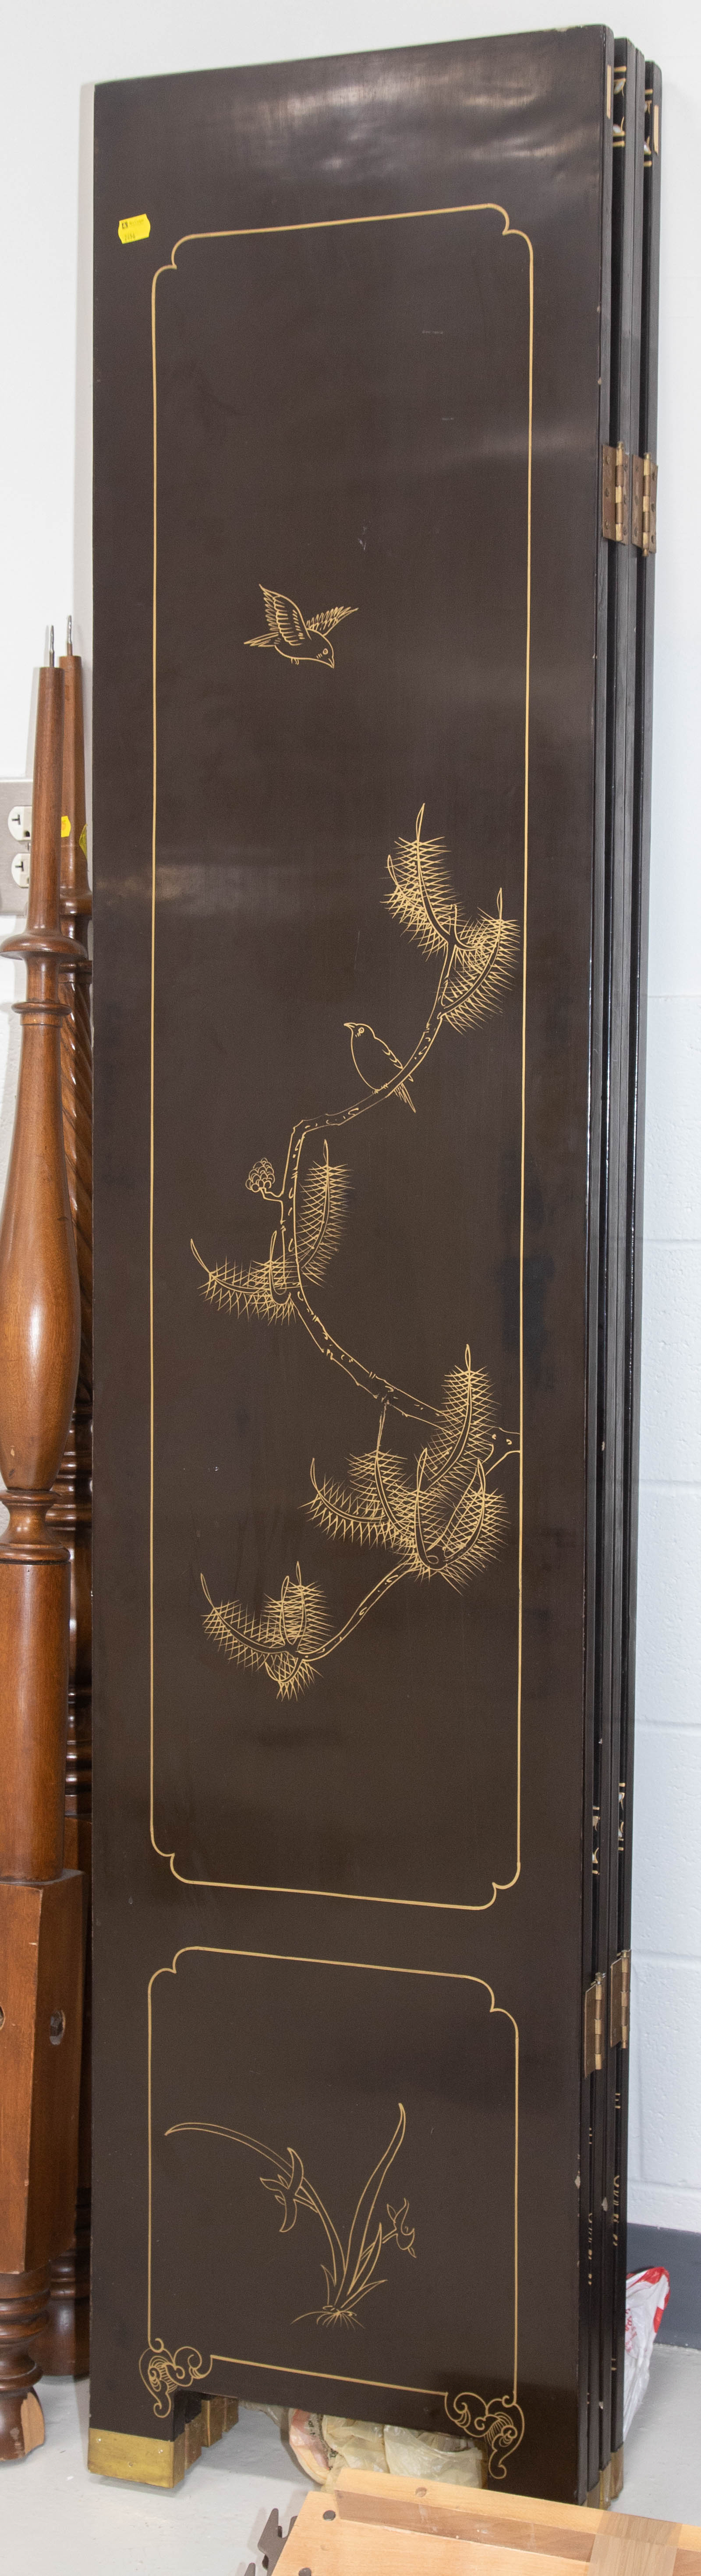 CHINESE LACQUER FOUR PANEL ROOM 33522c